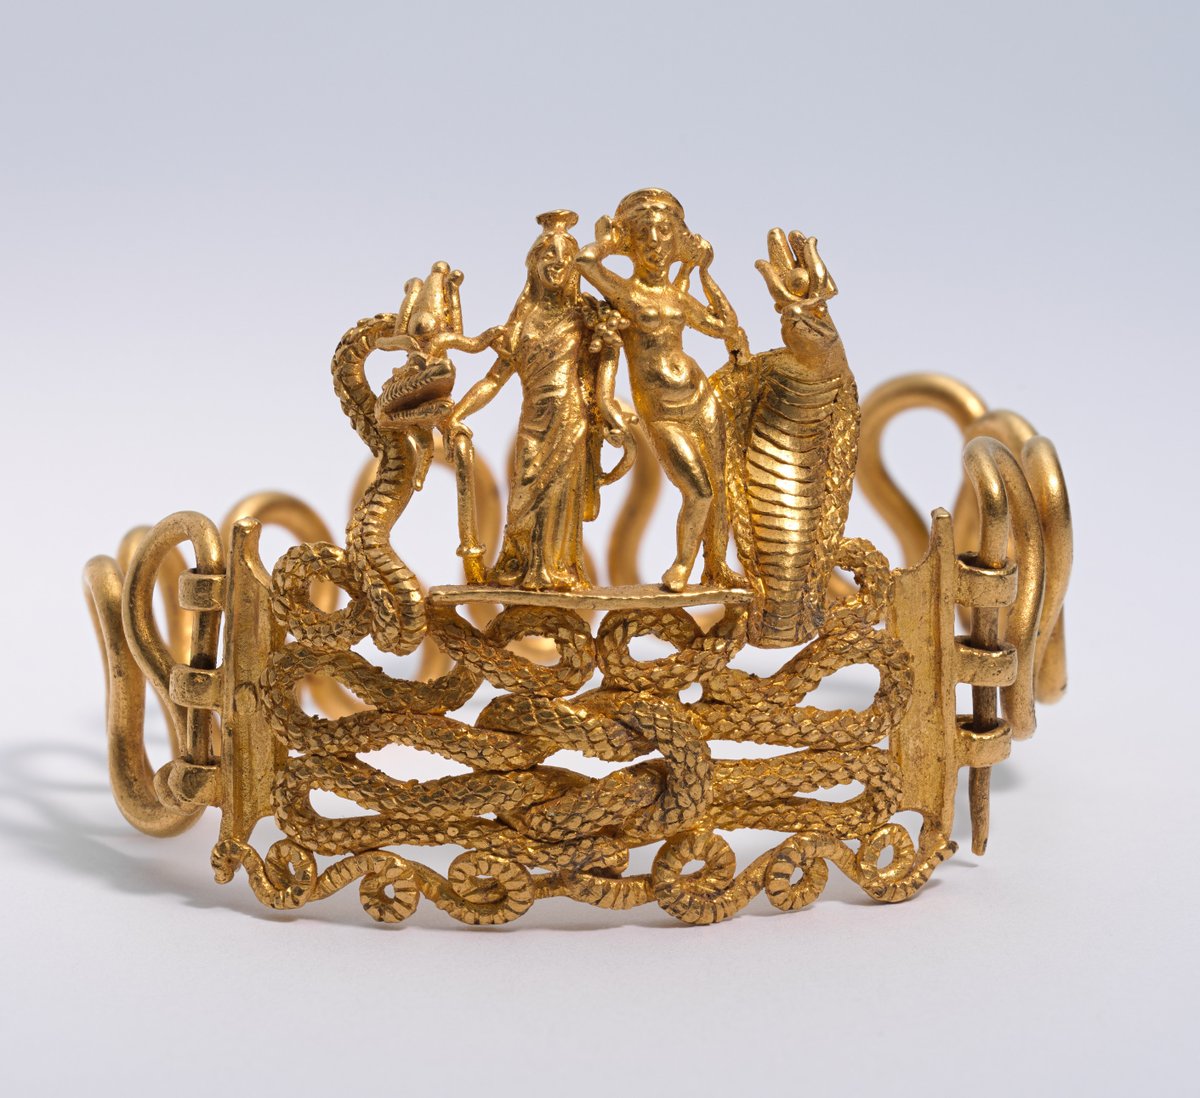 Bracelet with Agathodaimon, Isis-Tyche, Aphrodite, and Terenouthis. Period: Roman Period. Place of Origin: Egypt. Date: c. 1st century BC.–AD. 1st century. On view at The Met Fifth Avenue in Gallery 137, NY.